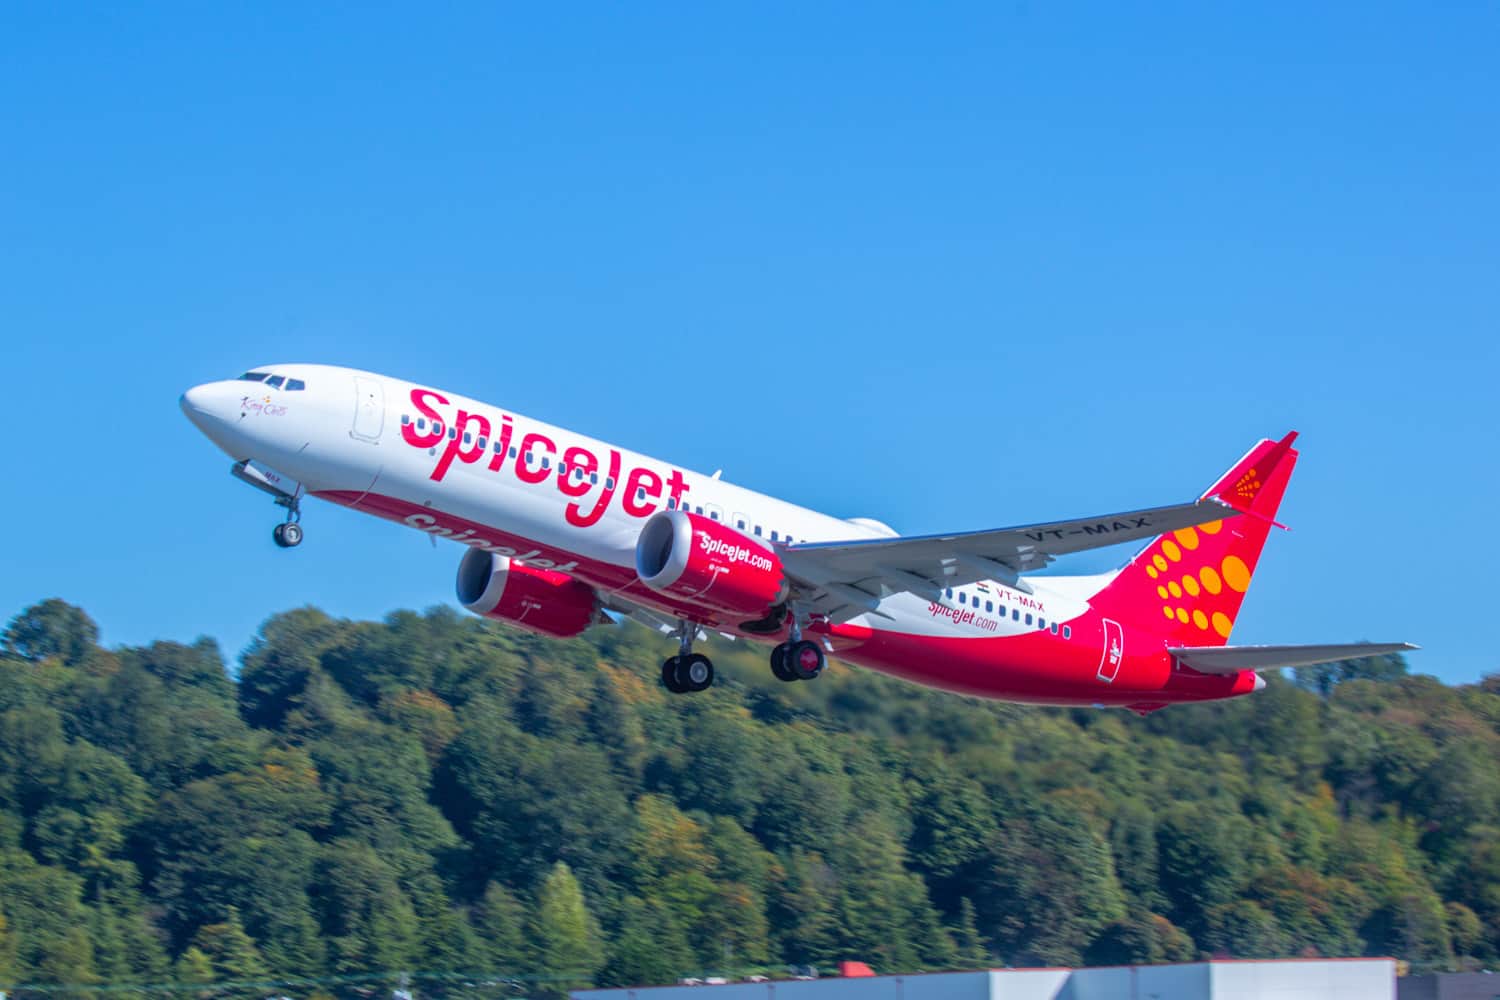 ICAO says it doesn't audit airlines just days after SpiceJet claims of 'safe airline'